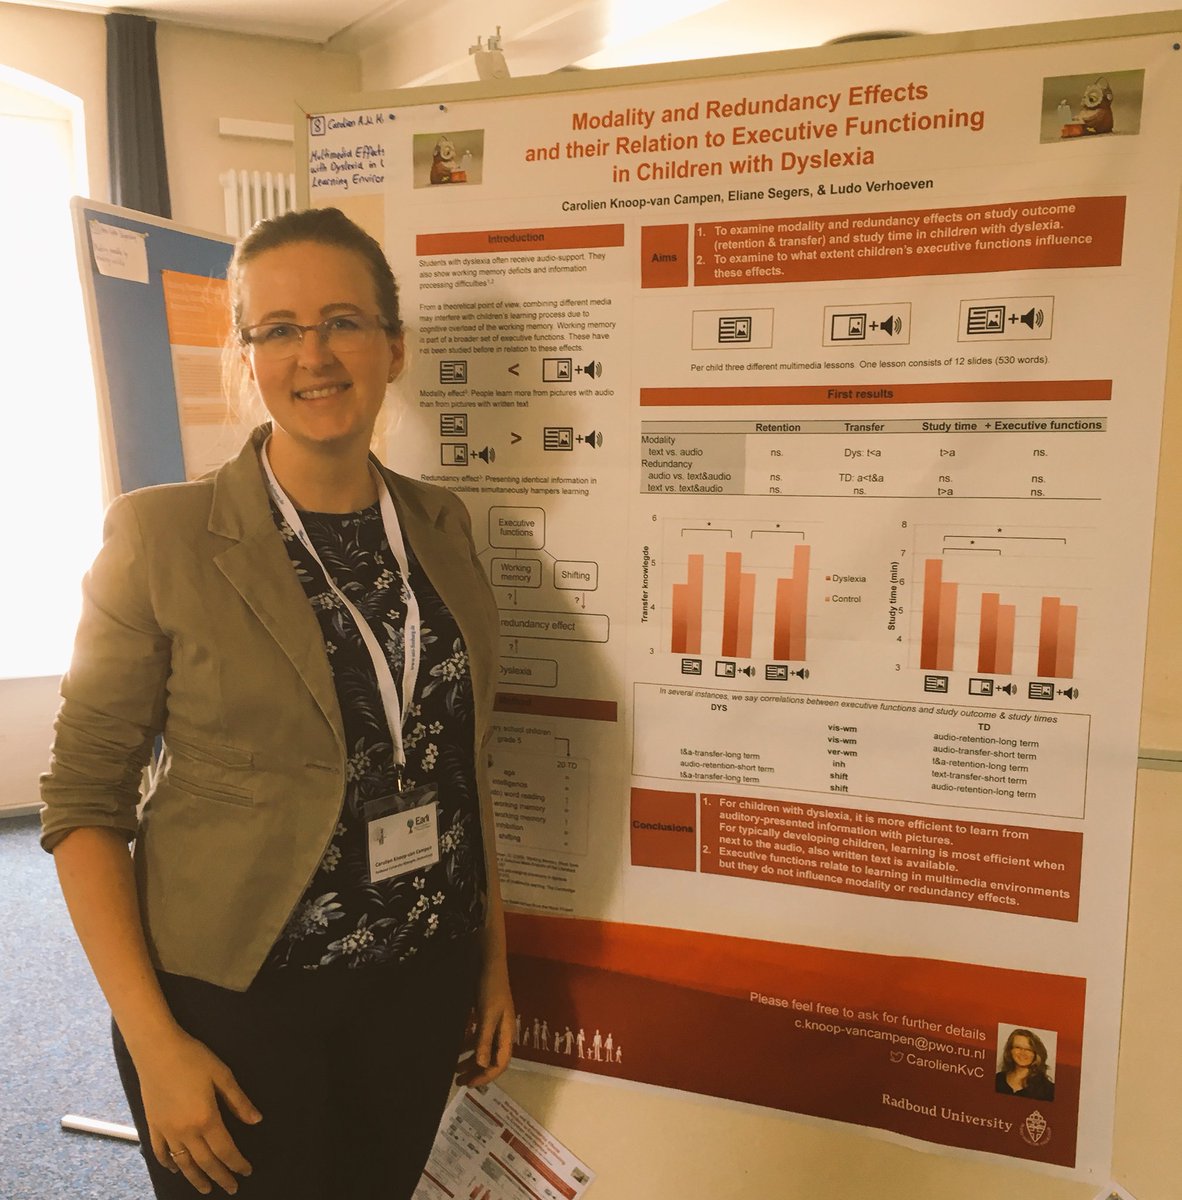 Presented my research on #multimedialearning #executivefunctions and #dyslexia. Great conversations and new ideas! #SIG2Freiburg #EARLI2018 #EARLI